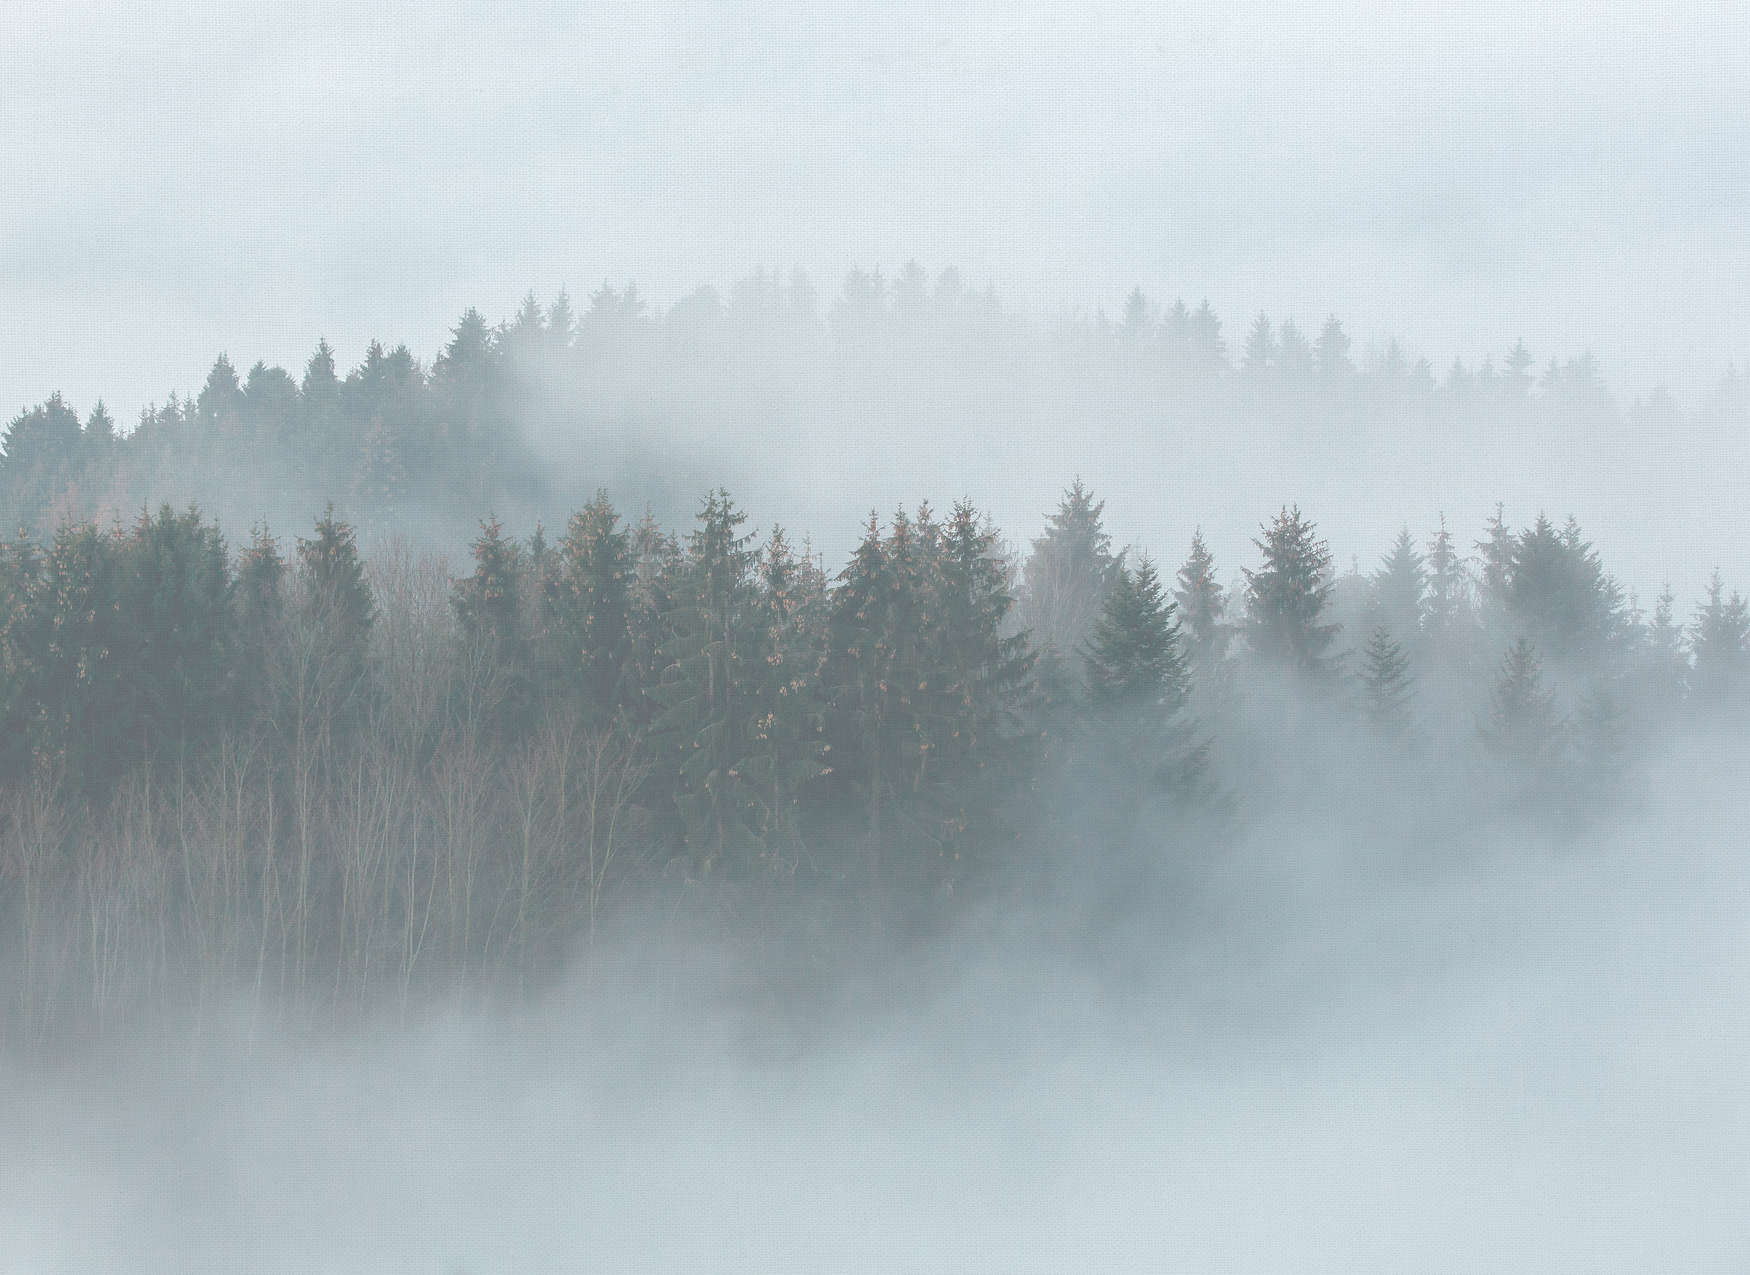             Mysterious Forest in the Mist - White, Green, Grey
        